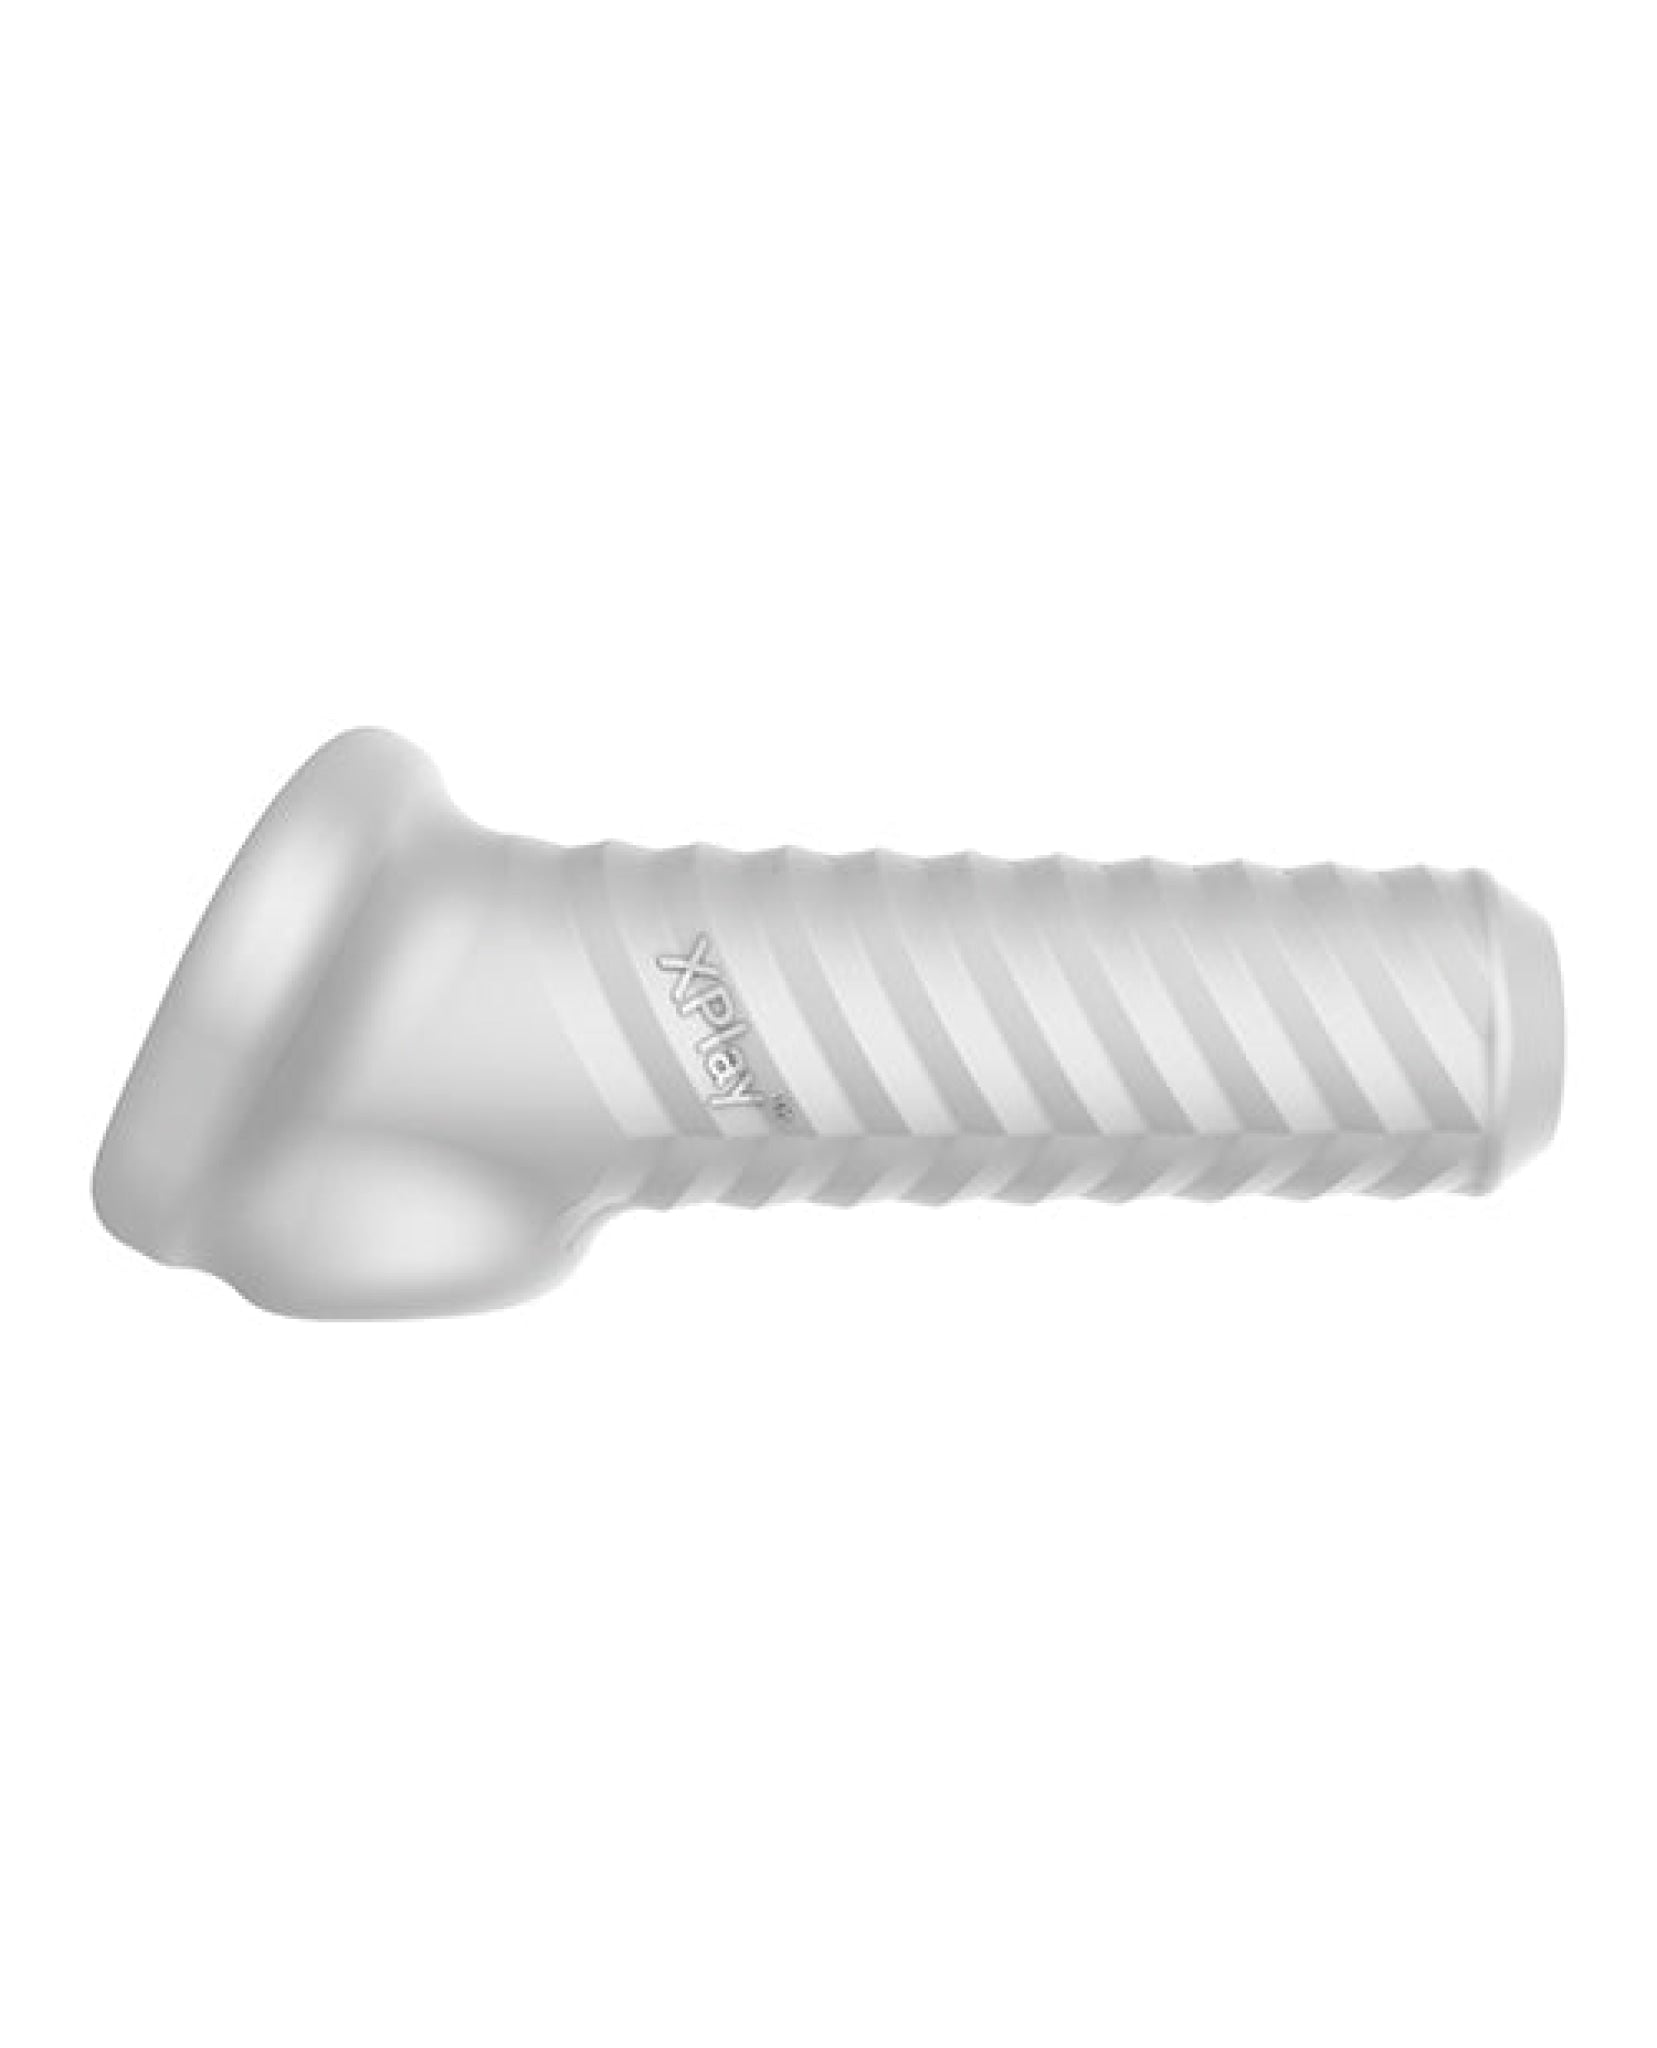 Xplay Gear Breeder Sleeve - White Perfect Fit